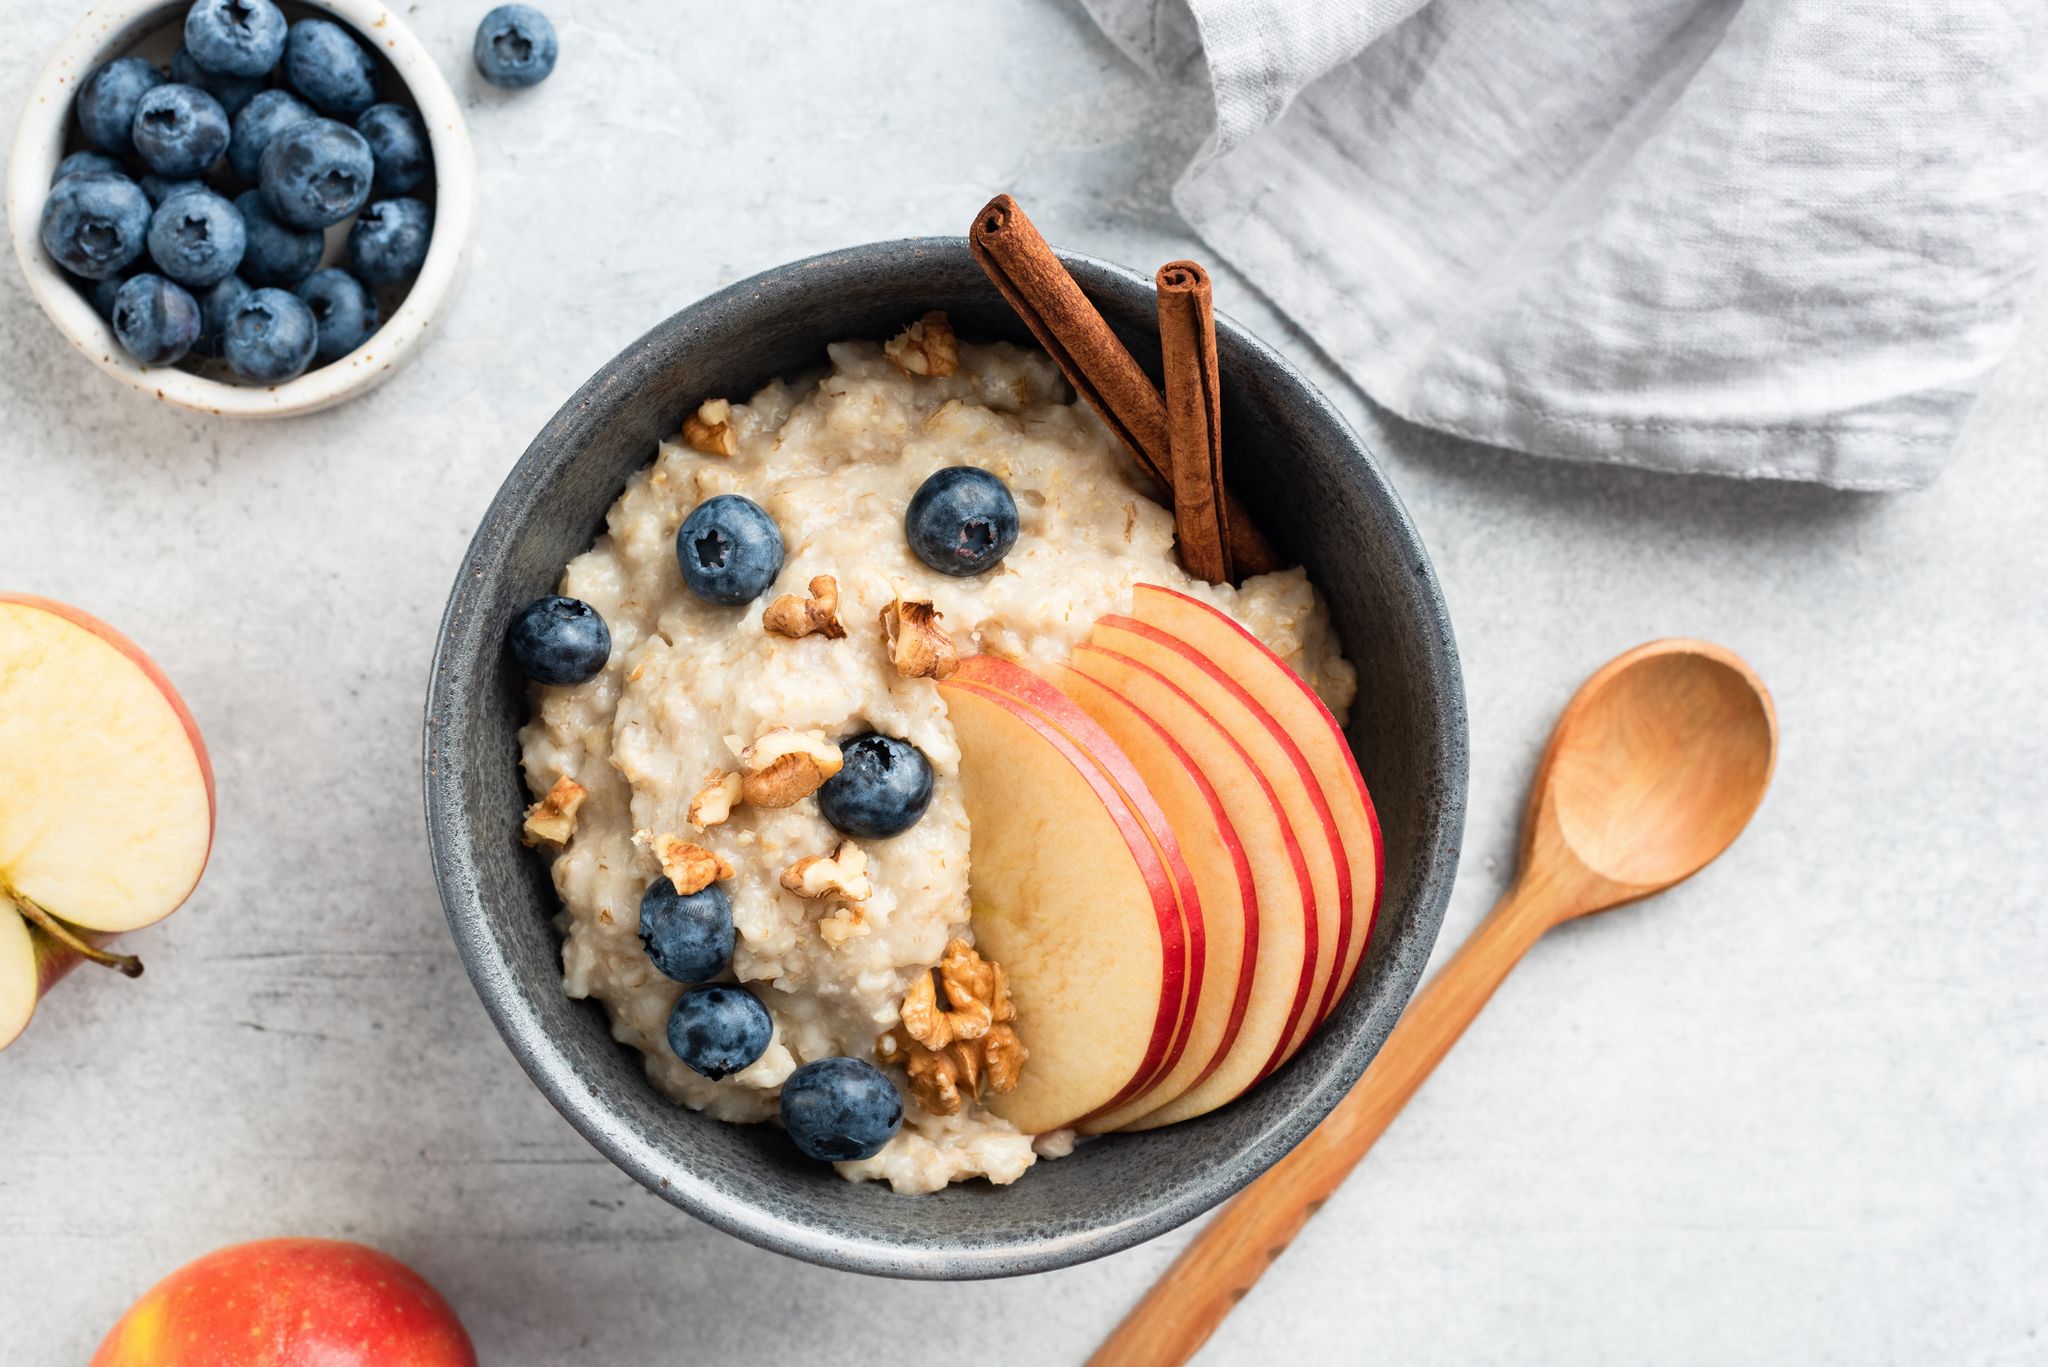 Porridge Recipes: 31 Ideas to Get You out of That Breakfast Rut